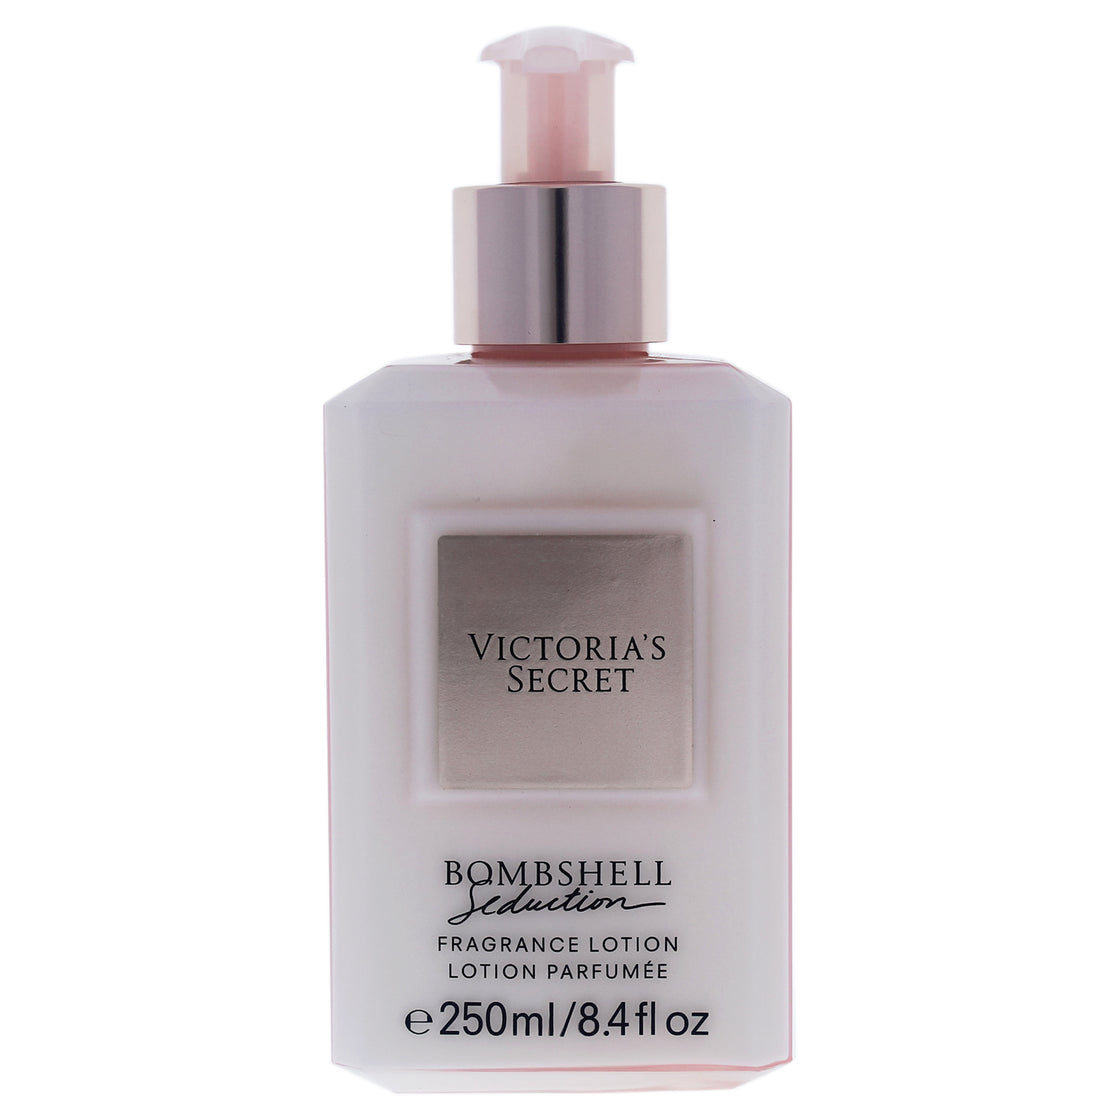 Bombshell Seduction Fragrance Lotion by Victorias Secret for Women - 8.4 oz Body Lotion